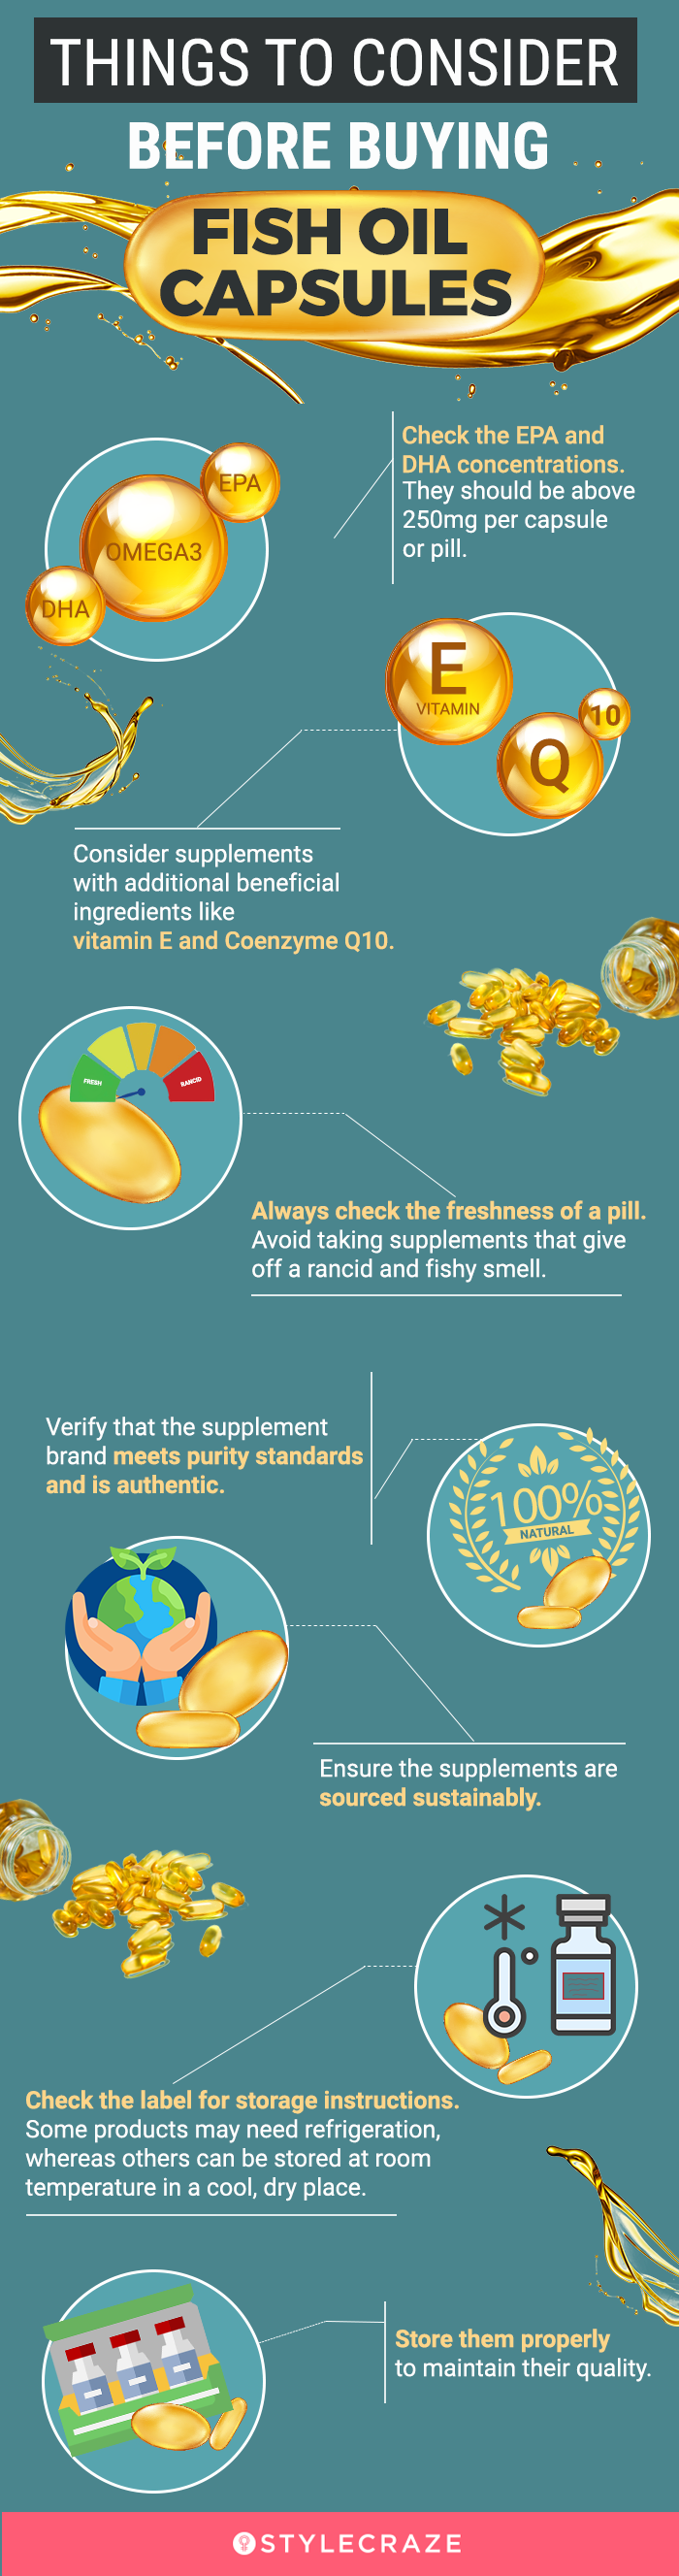 things to consider before buying fish oil capsules (infographic)